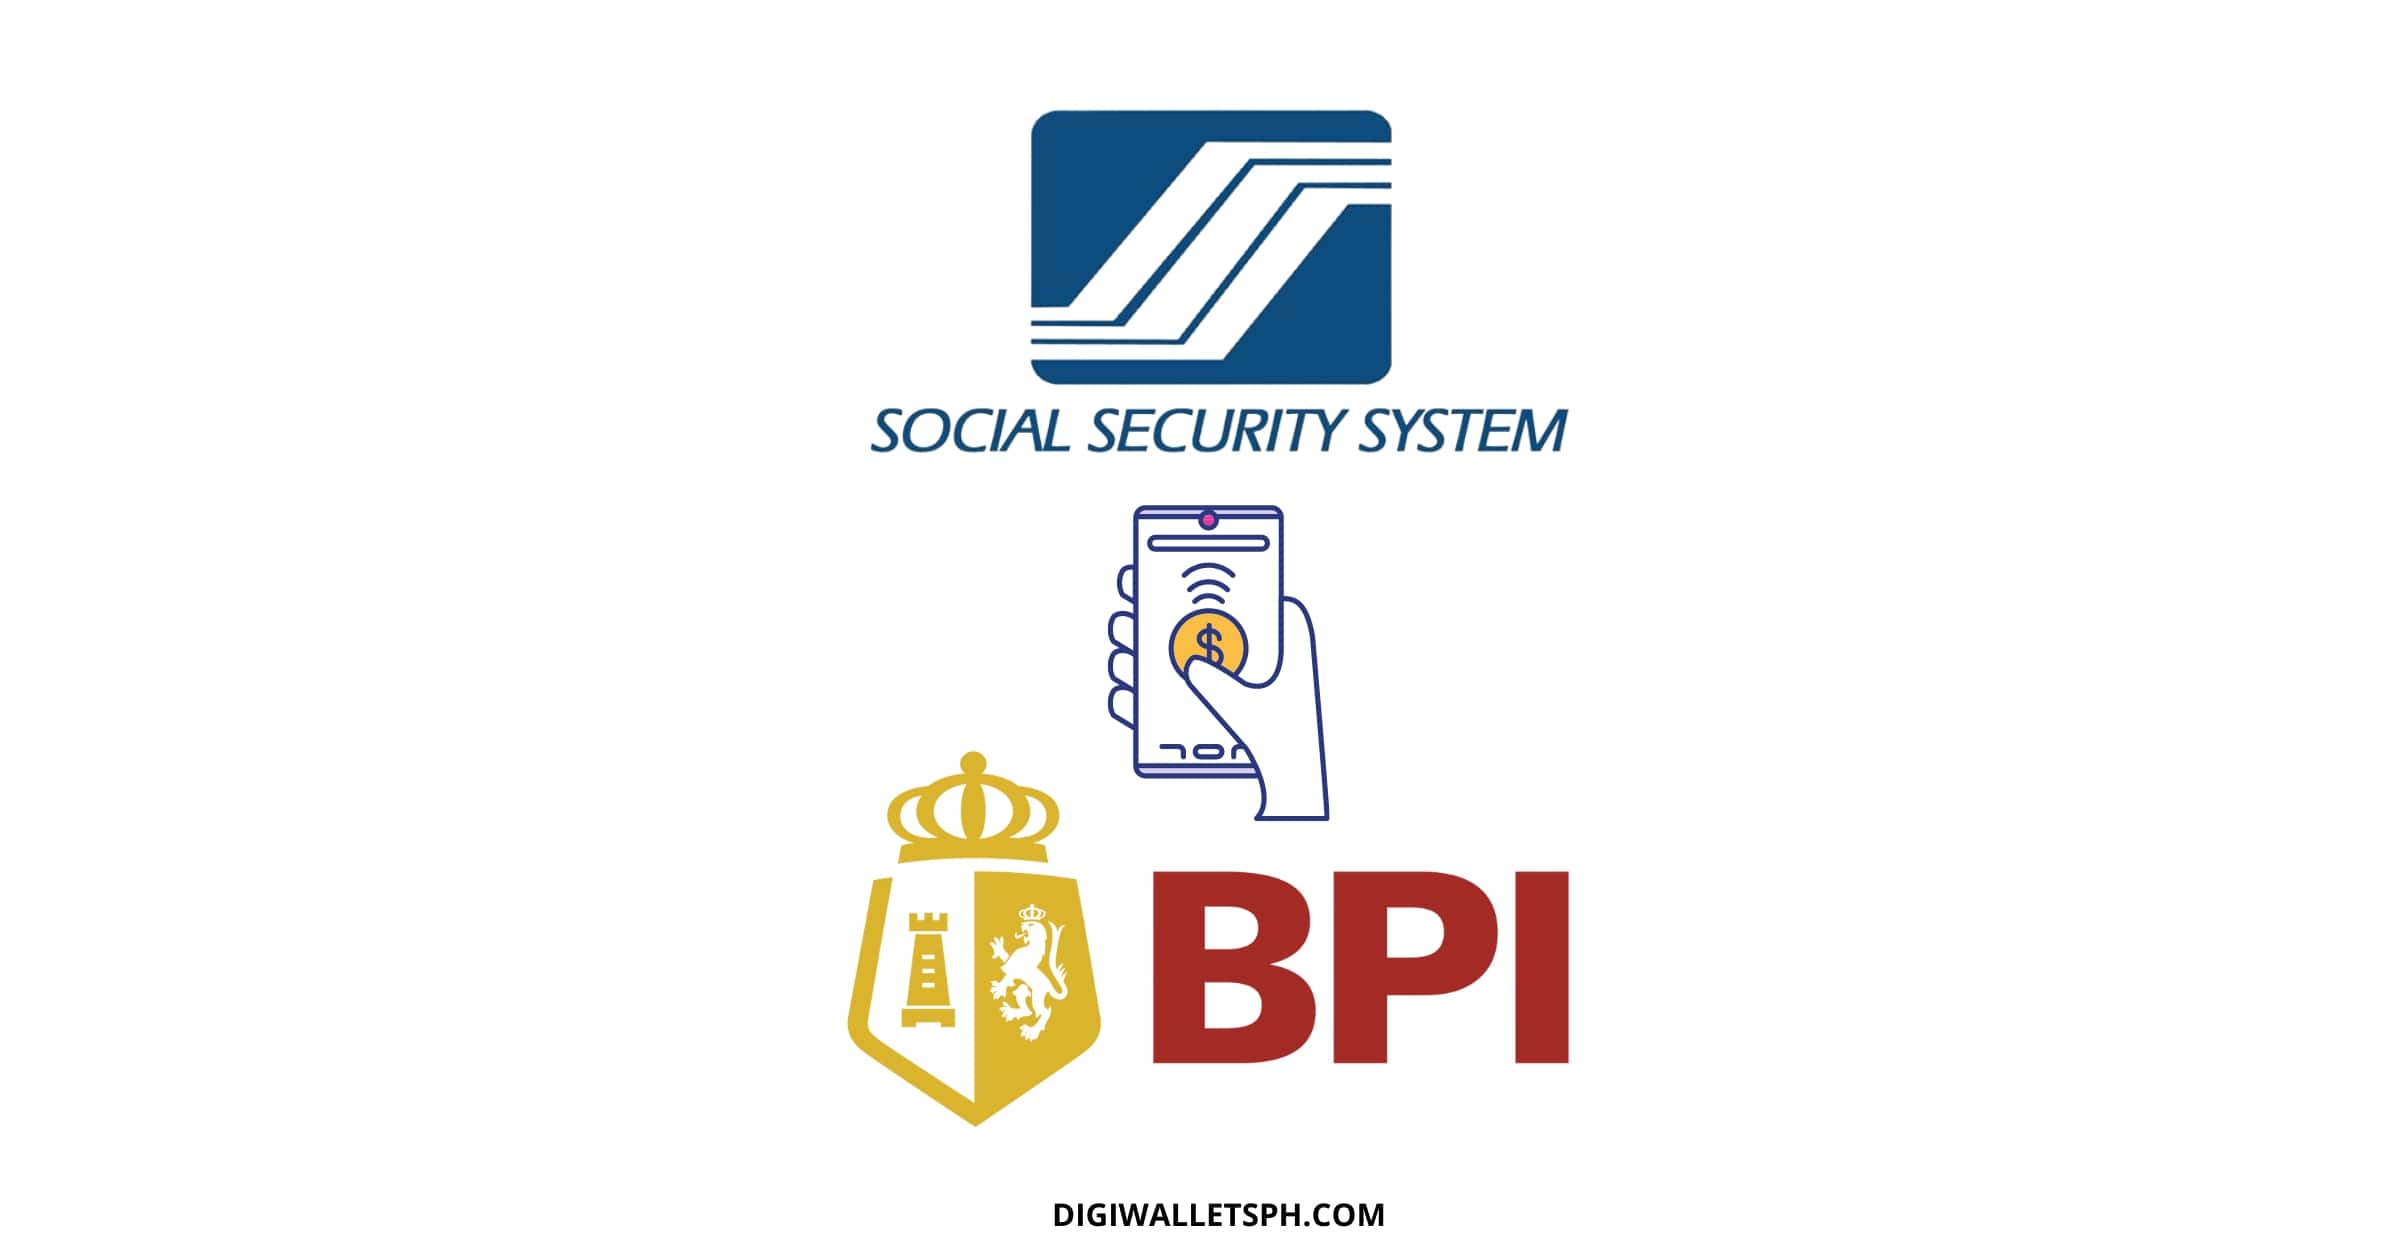 How to pay SSS online BPI